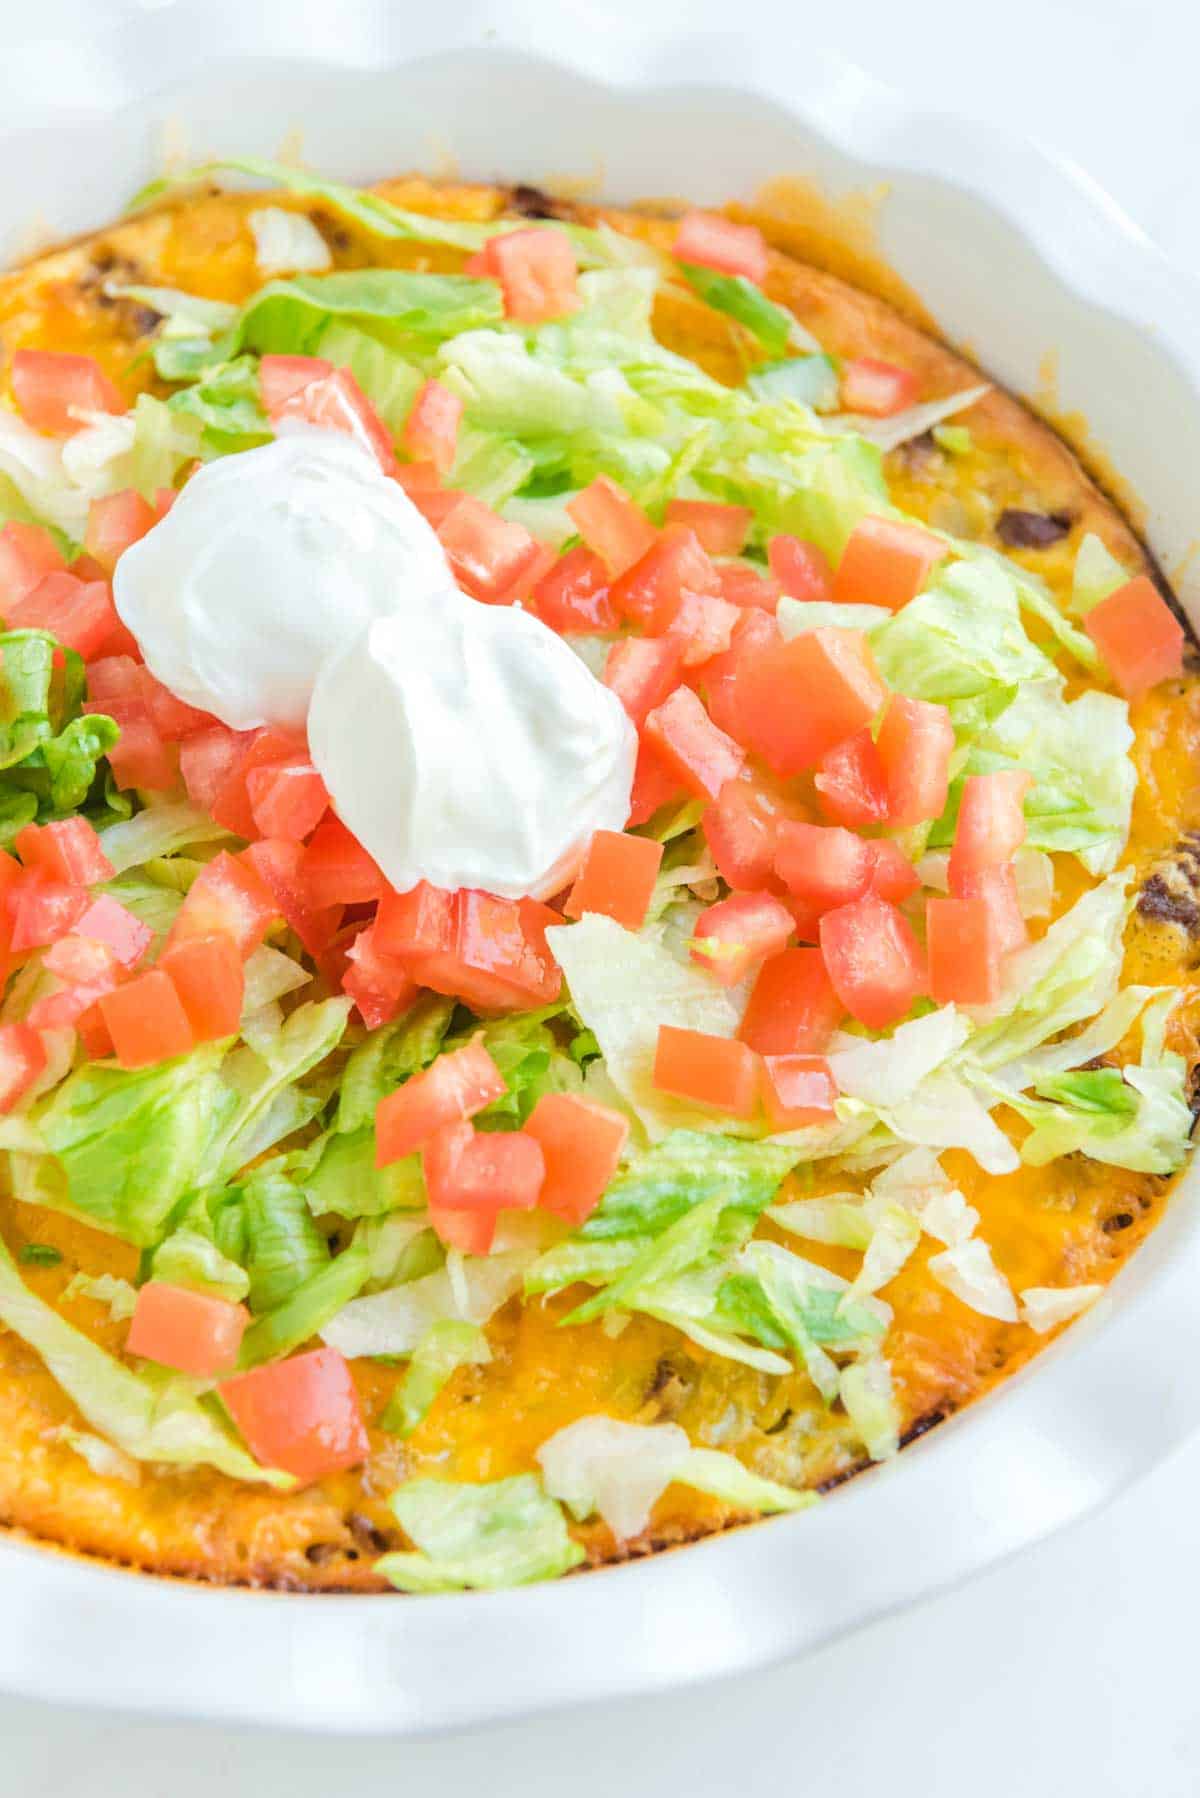 Impossible taco pie topped with lettuce, chopped tomatoes, and sour cream.